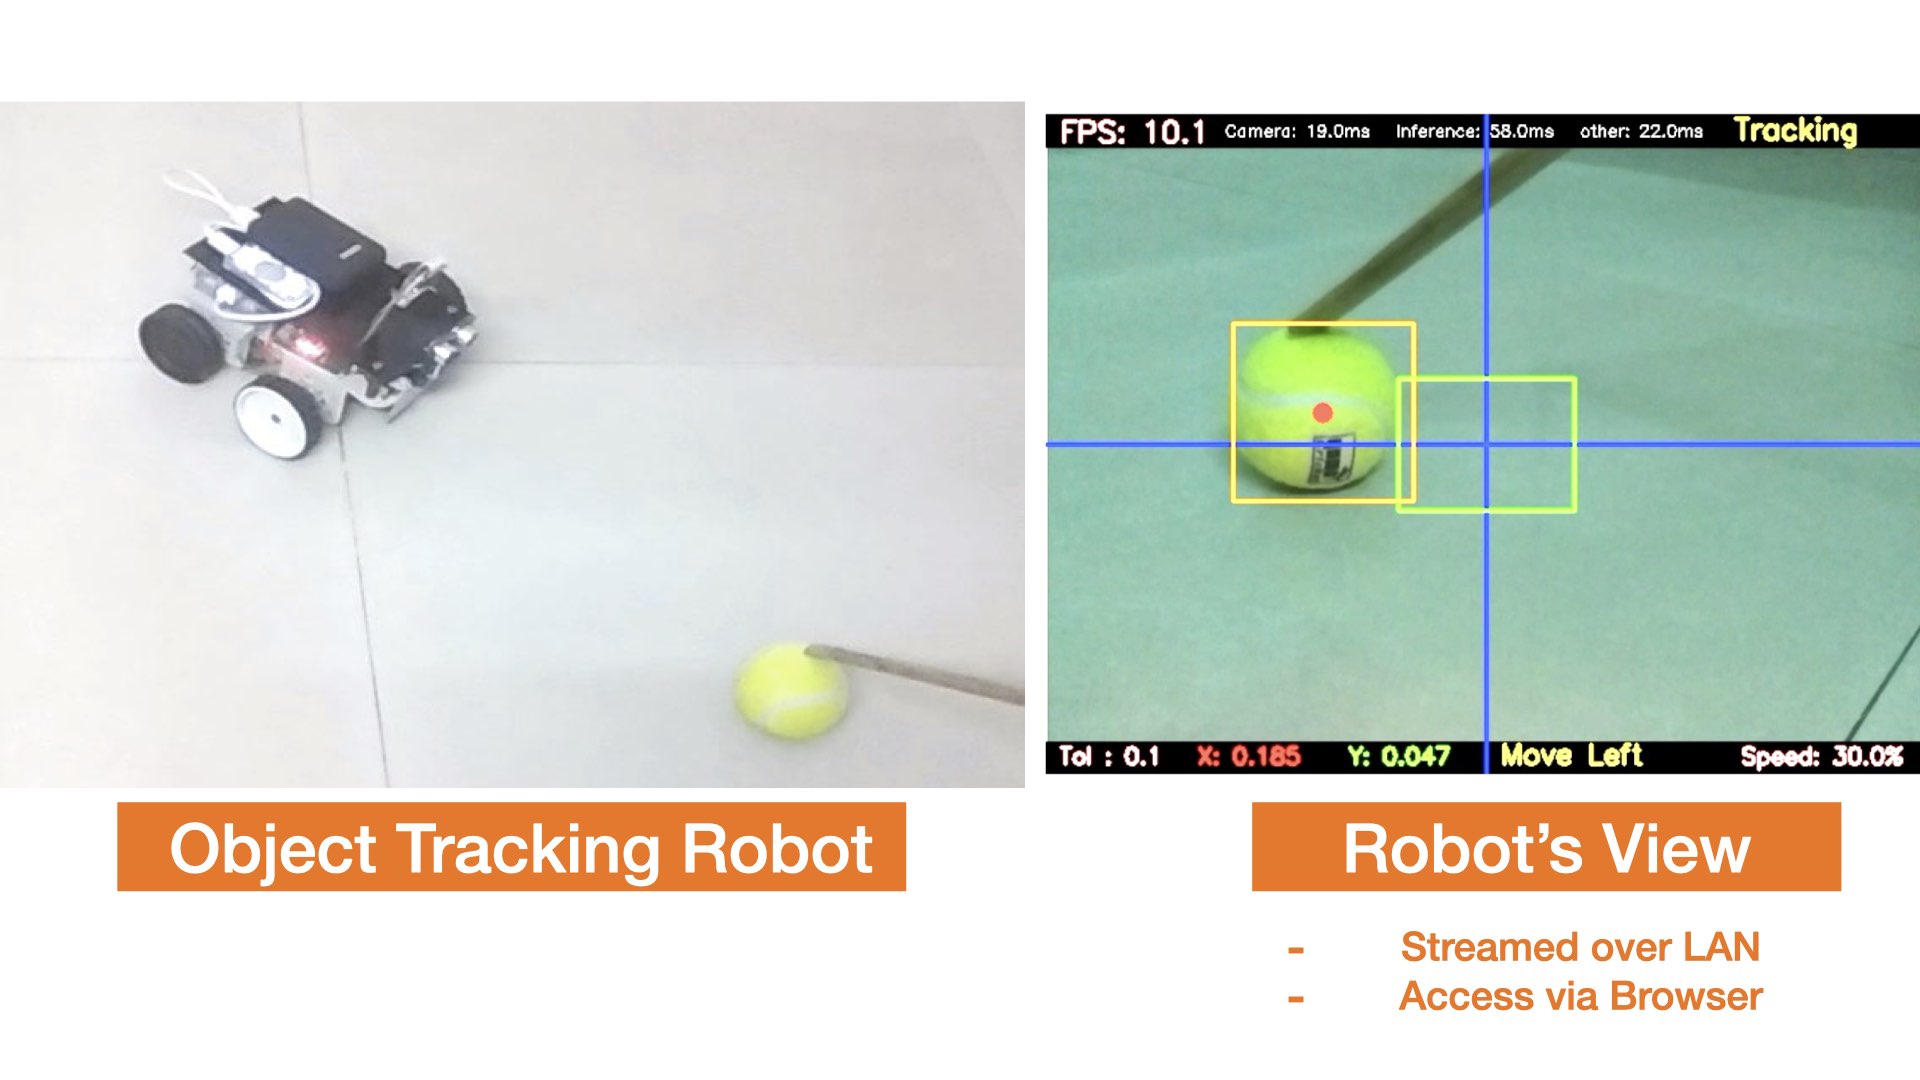 object tracking robot using raspberry pi, tensorflow lite and opencv